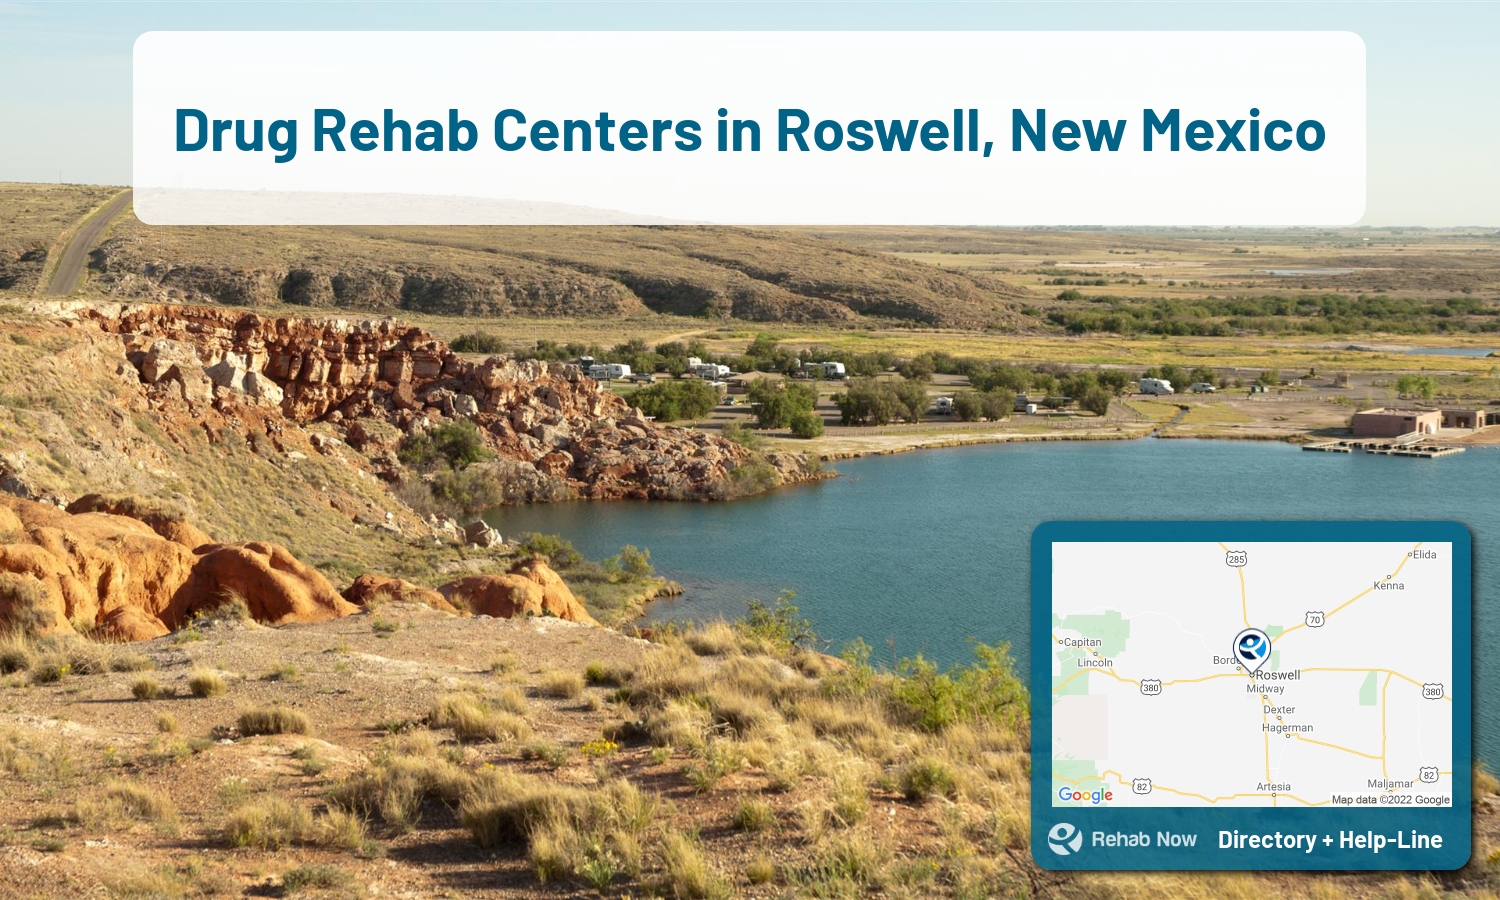 Let our expert counselors help find the best addiction treatment in Roswell, New Mexico now with a free call to our hotline.